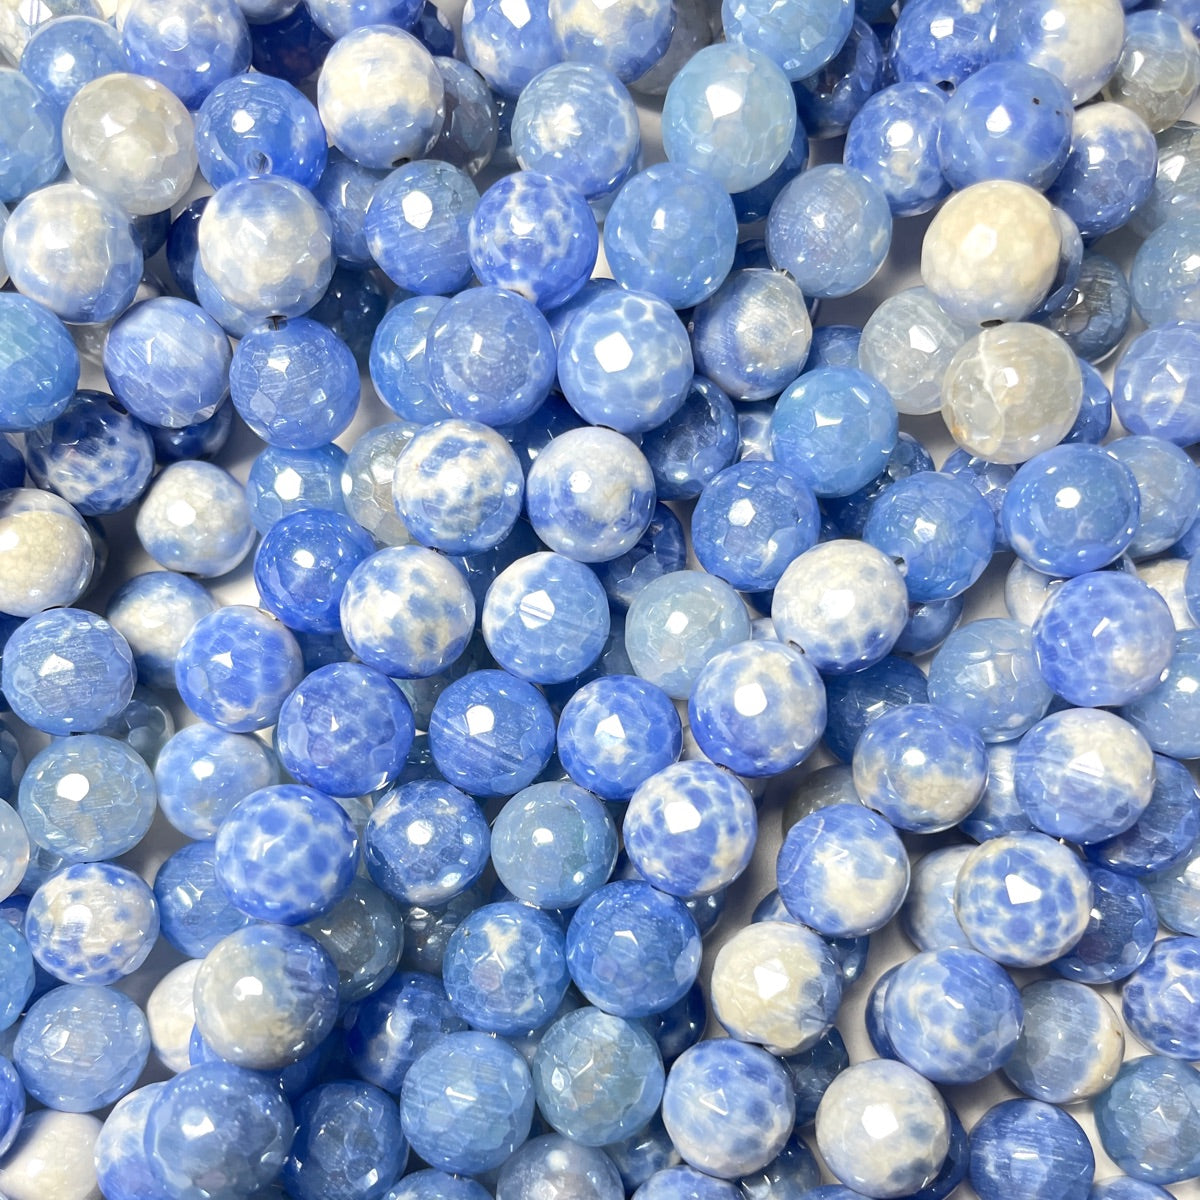 2 Strands/lot 10mm Electroplated Blue White Fire Agate Faceted Stone Beads Electroplated Beads Electroplated Faceted Agate Beads New Beads Arrivals Charms Beads Beyond